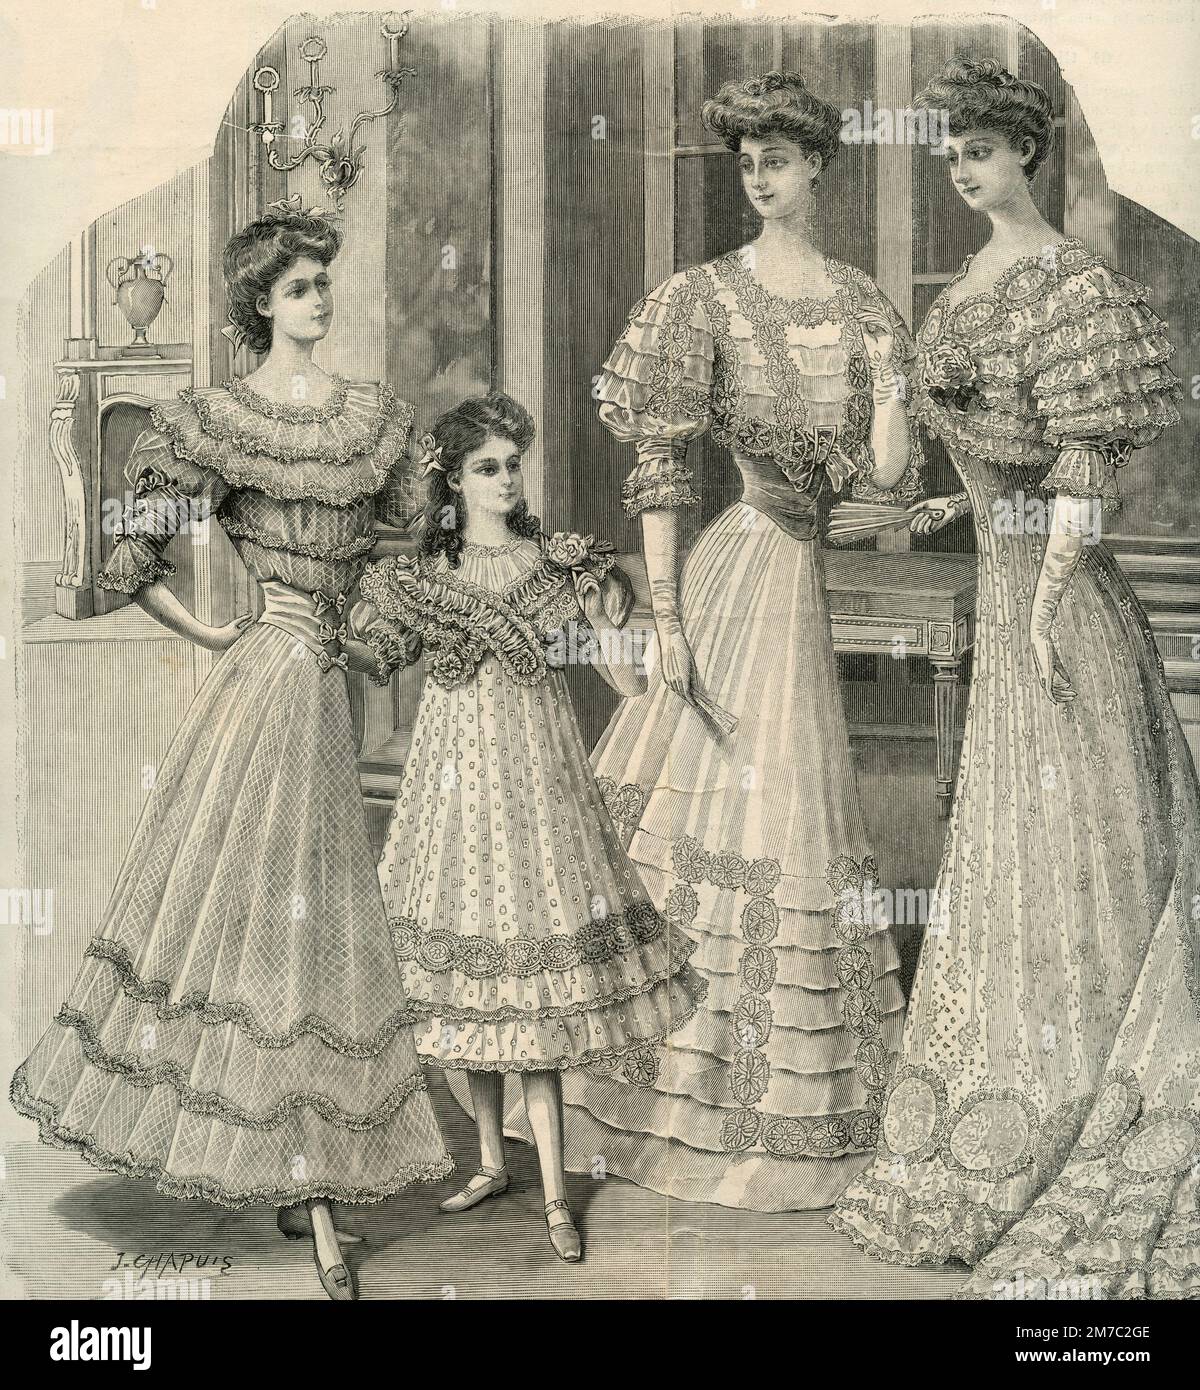 https://c8.alamy.com/comp/2M7C2GE/illustration-of-women-clothes-fashion-and-style-from-vintage-magazine-italy-1900s-2M7C2GE.jpg